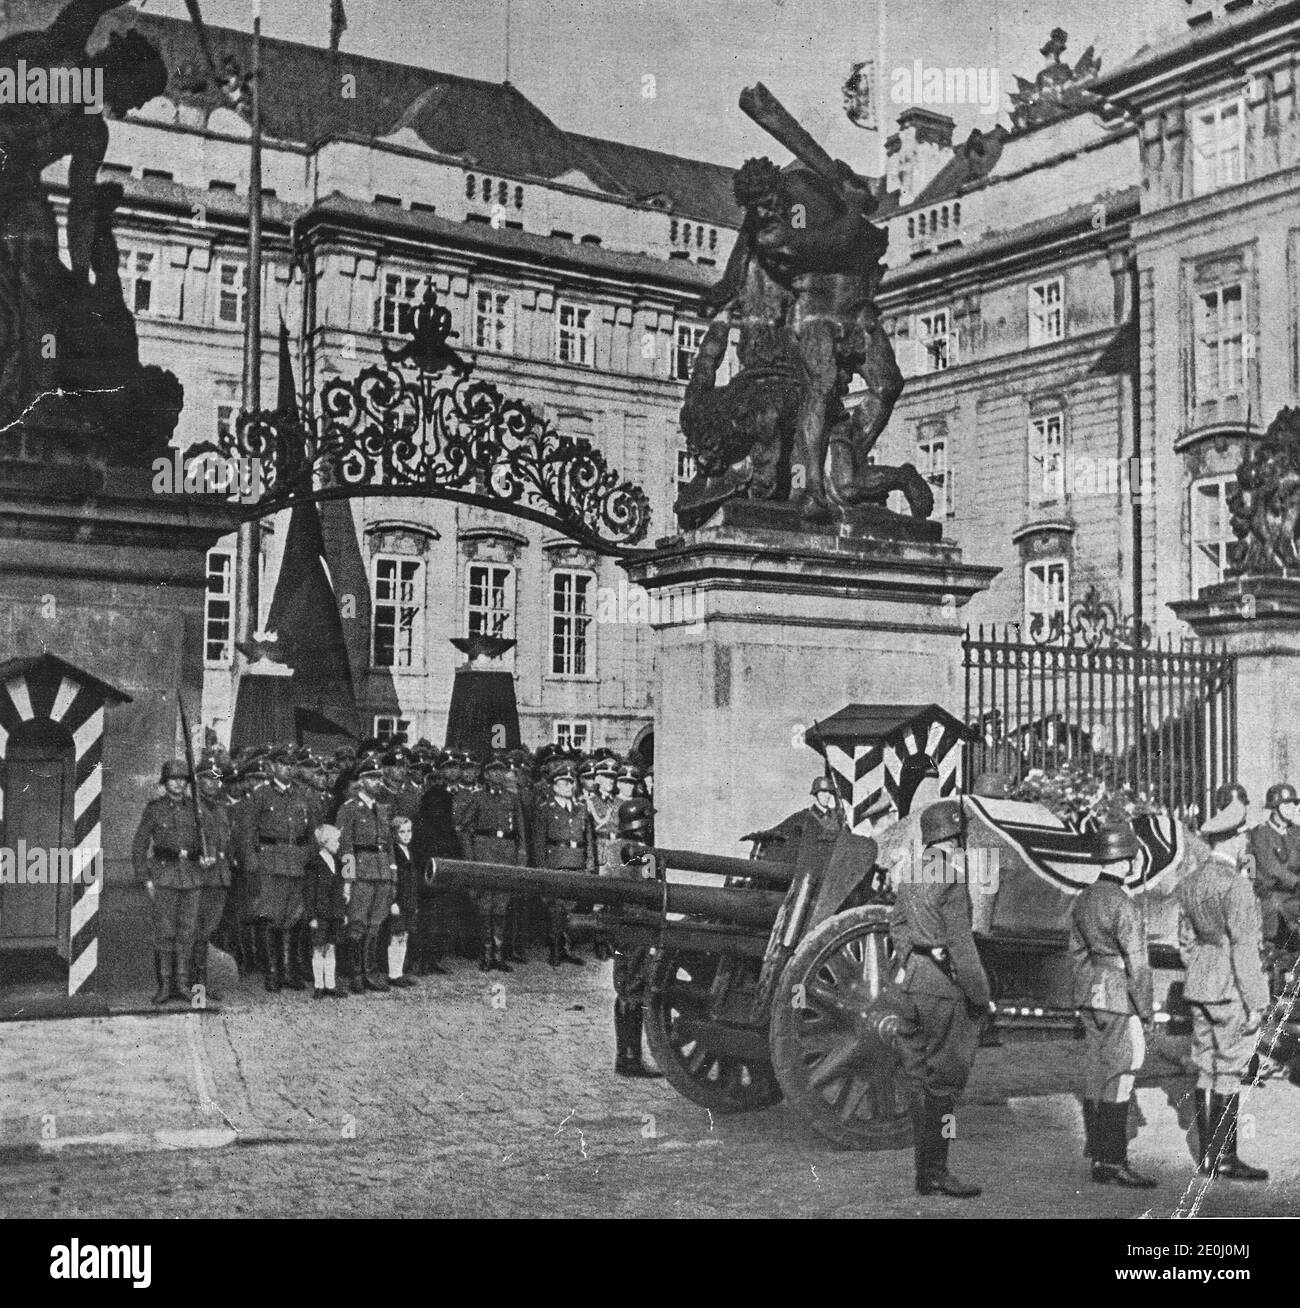 PRAGUE, PROTECTORATE OF BOHEMIA AND MORAVIA - JUNE 7, 1942: An elaborate funeral held in Prague on 7 June 1942, Heydrich's coffin on gun carriage. The Stock Photo